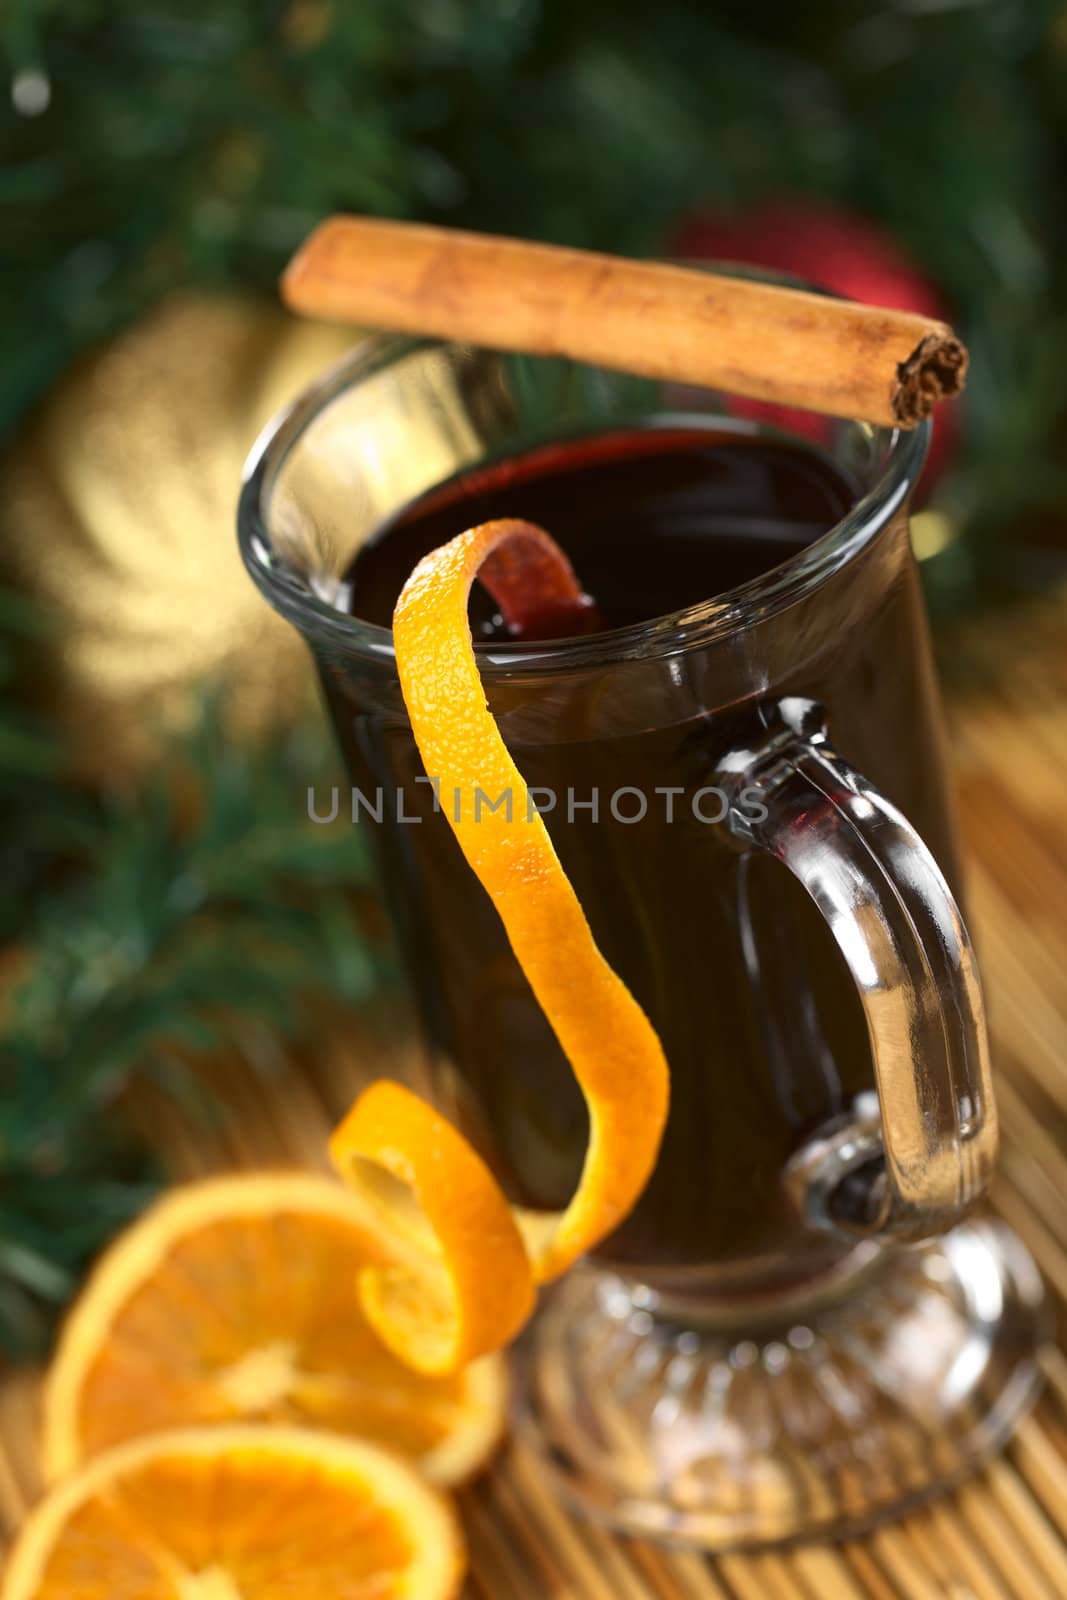 Hot spiced mulled wine garnished with orange peel and cinnamon stick (Selective Focus, Focus on the front rim of the glass and the orange peel at the rim)